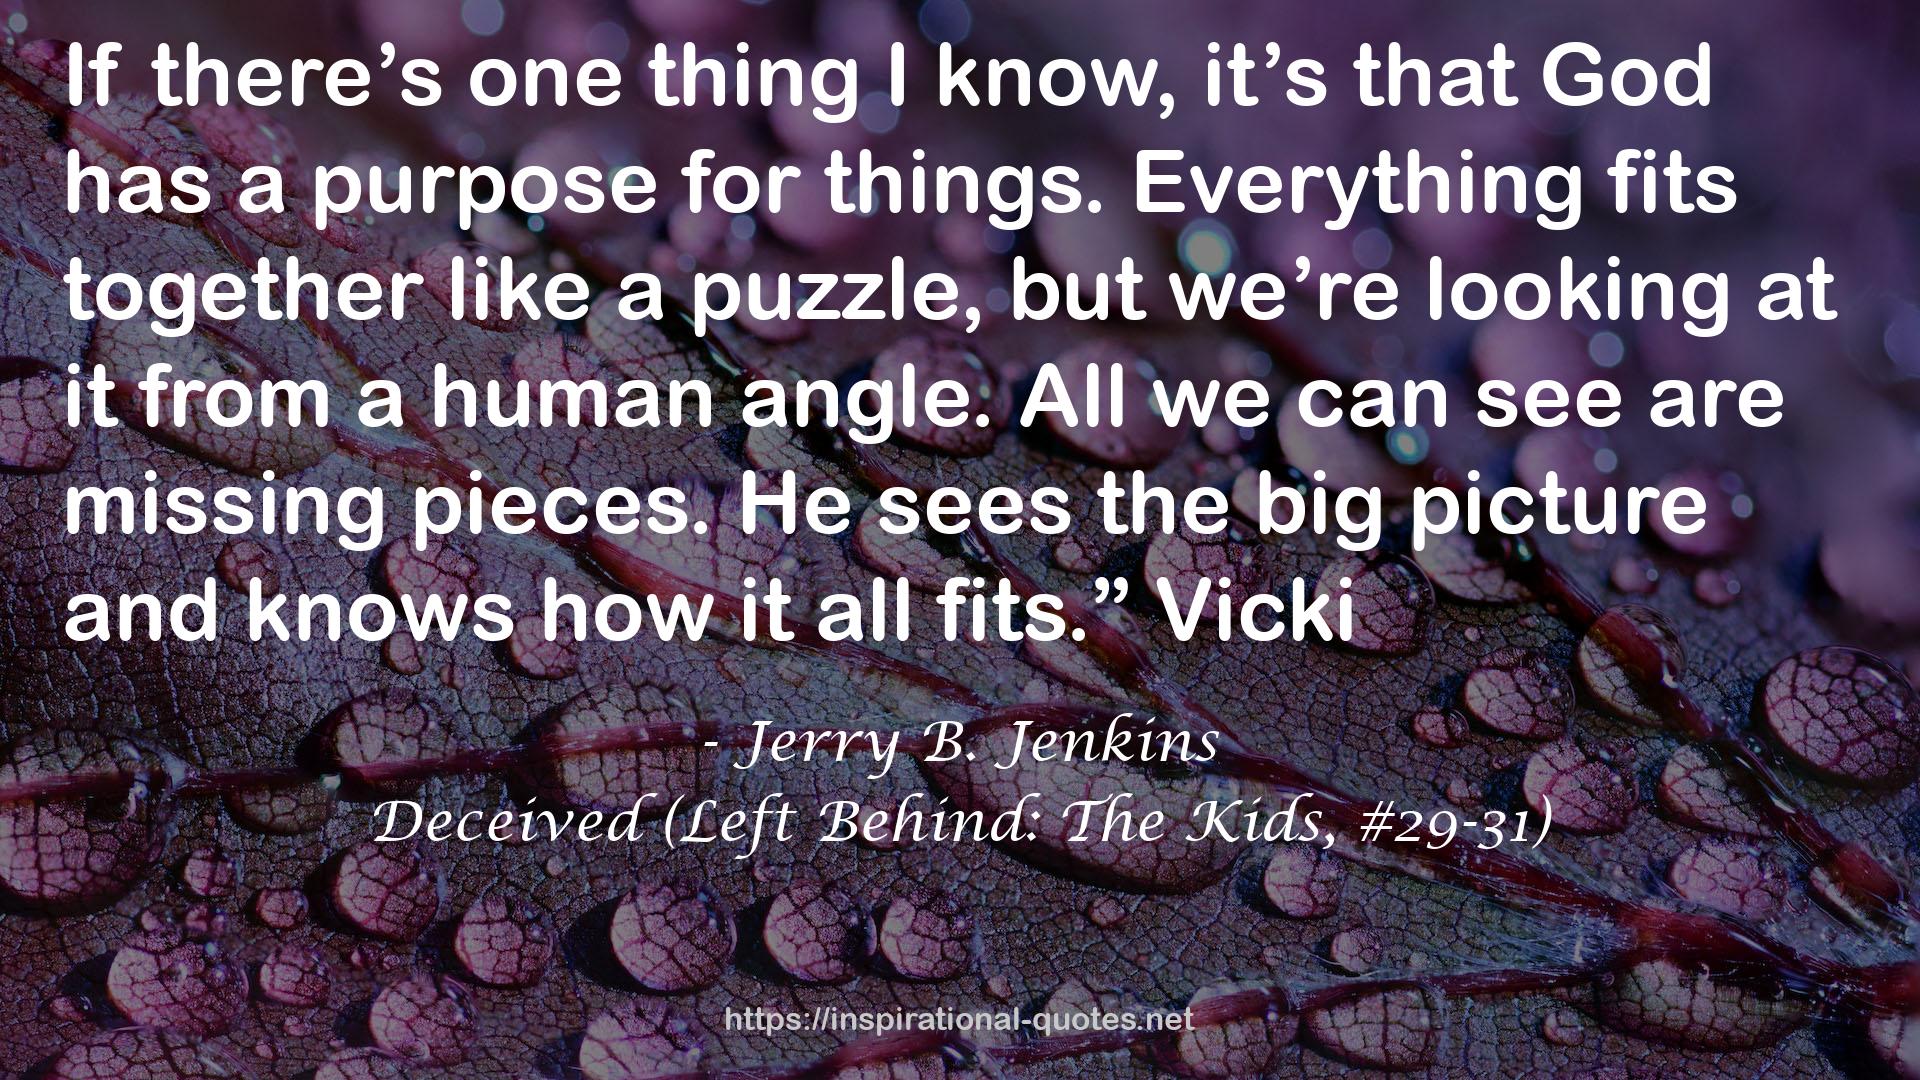 Deceived (Left Behind: The Kids, #29-31) QUOTES